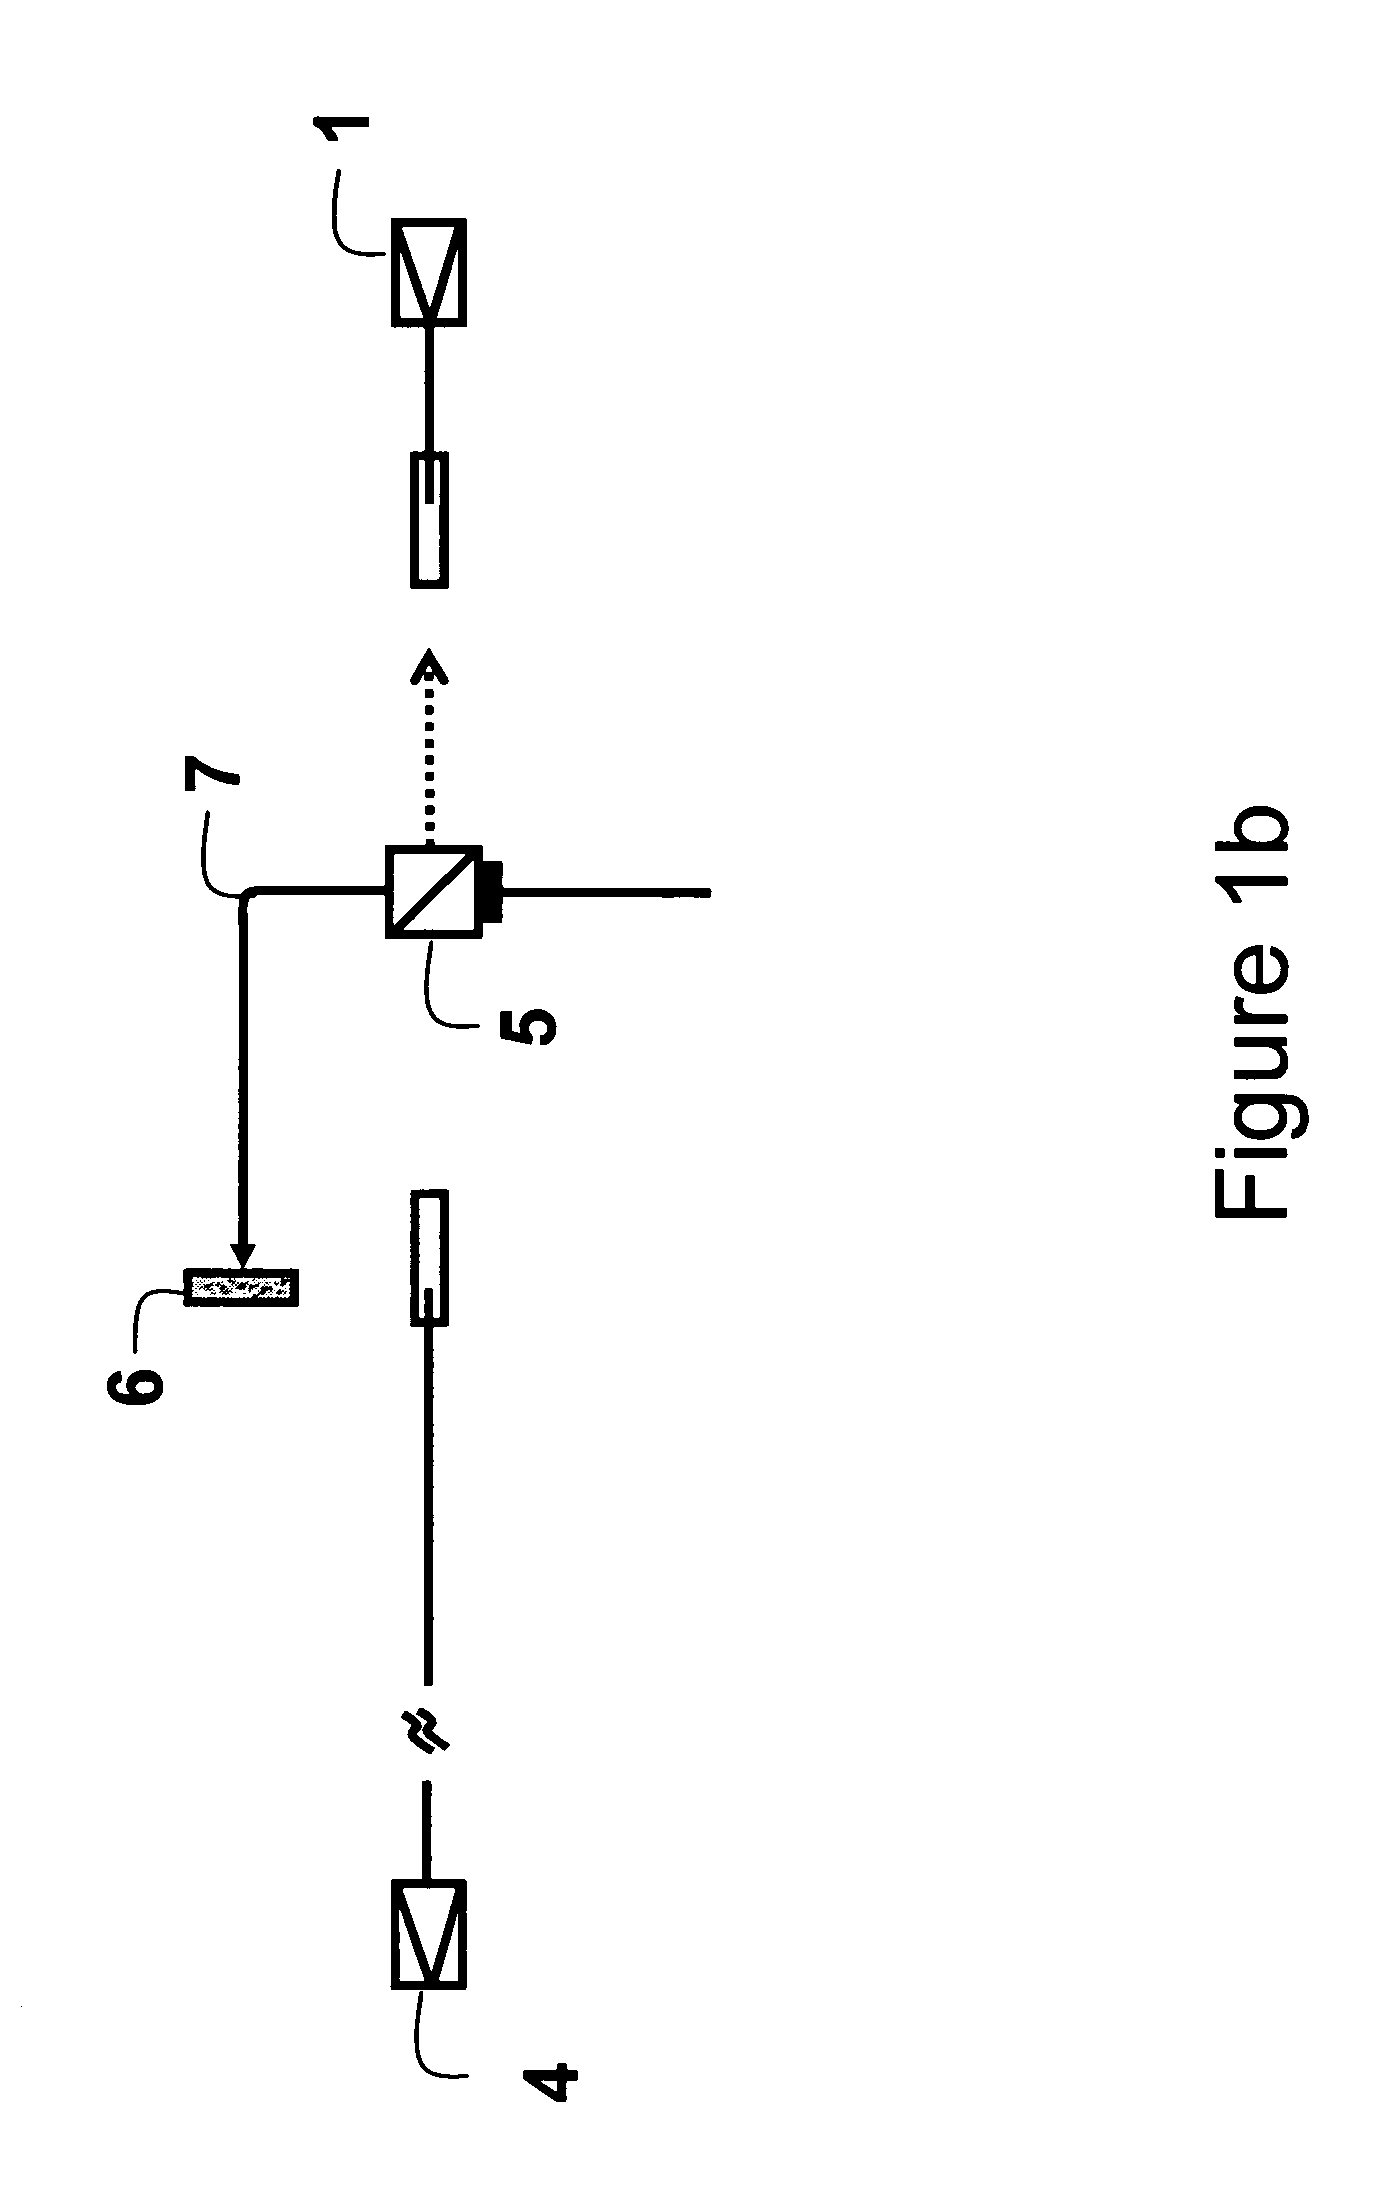 Time-Resolved Spectroscopy System and Methods for Multiple-Species Analysis in Fluorescence and Cavity-Ringdown Applications